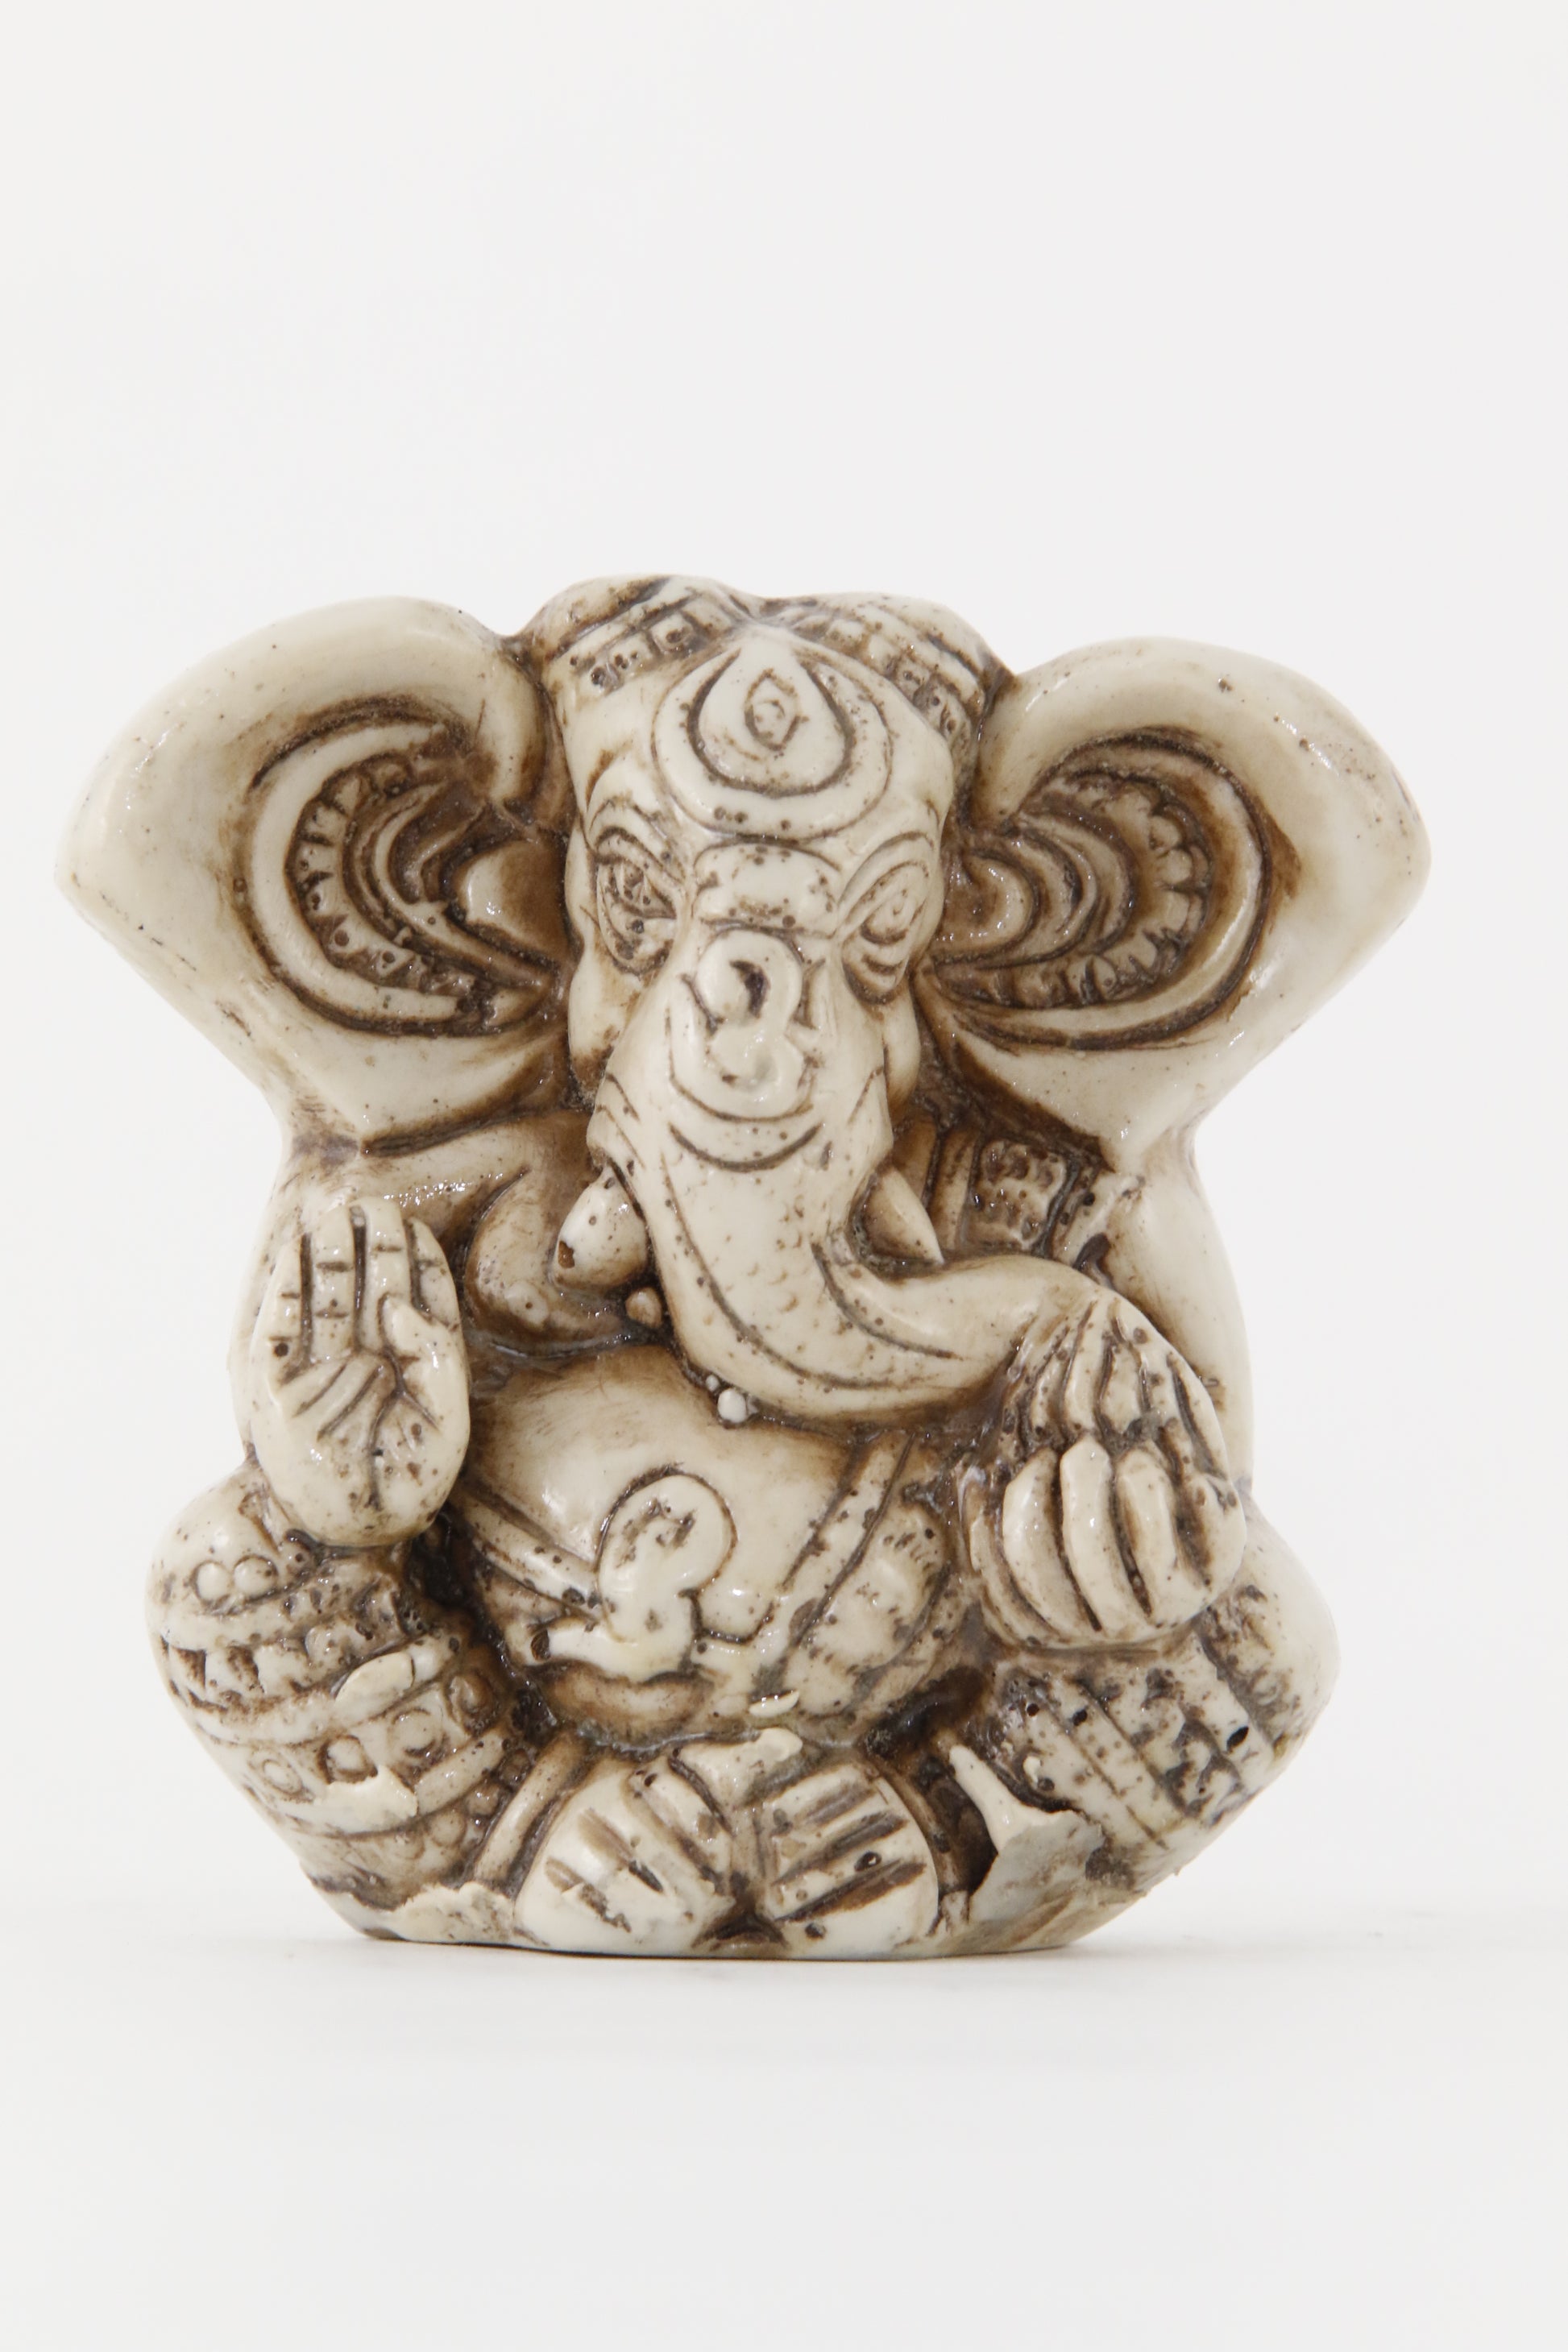 GANESHA BIG EAR STATUE OFFWHITE SMALL SIZE FRONT VIEW